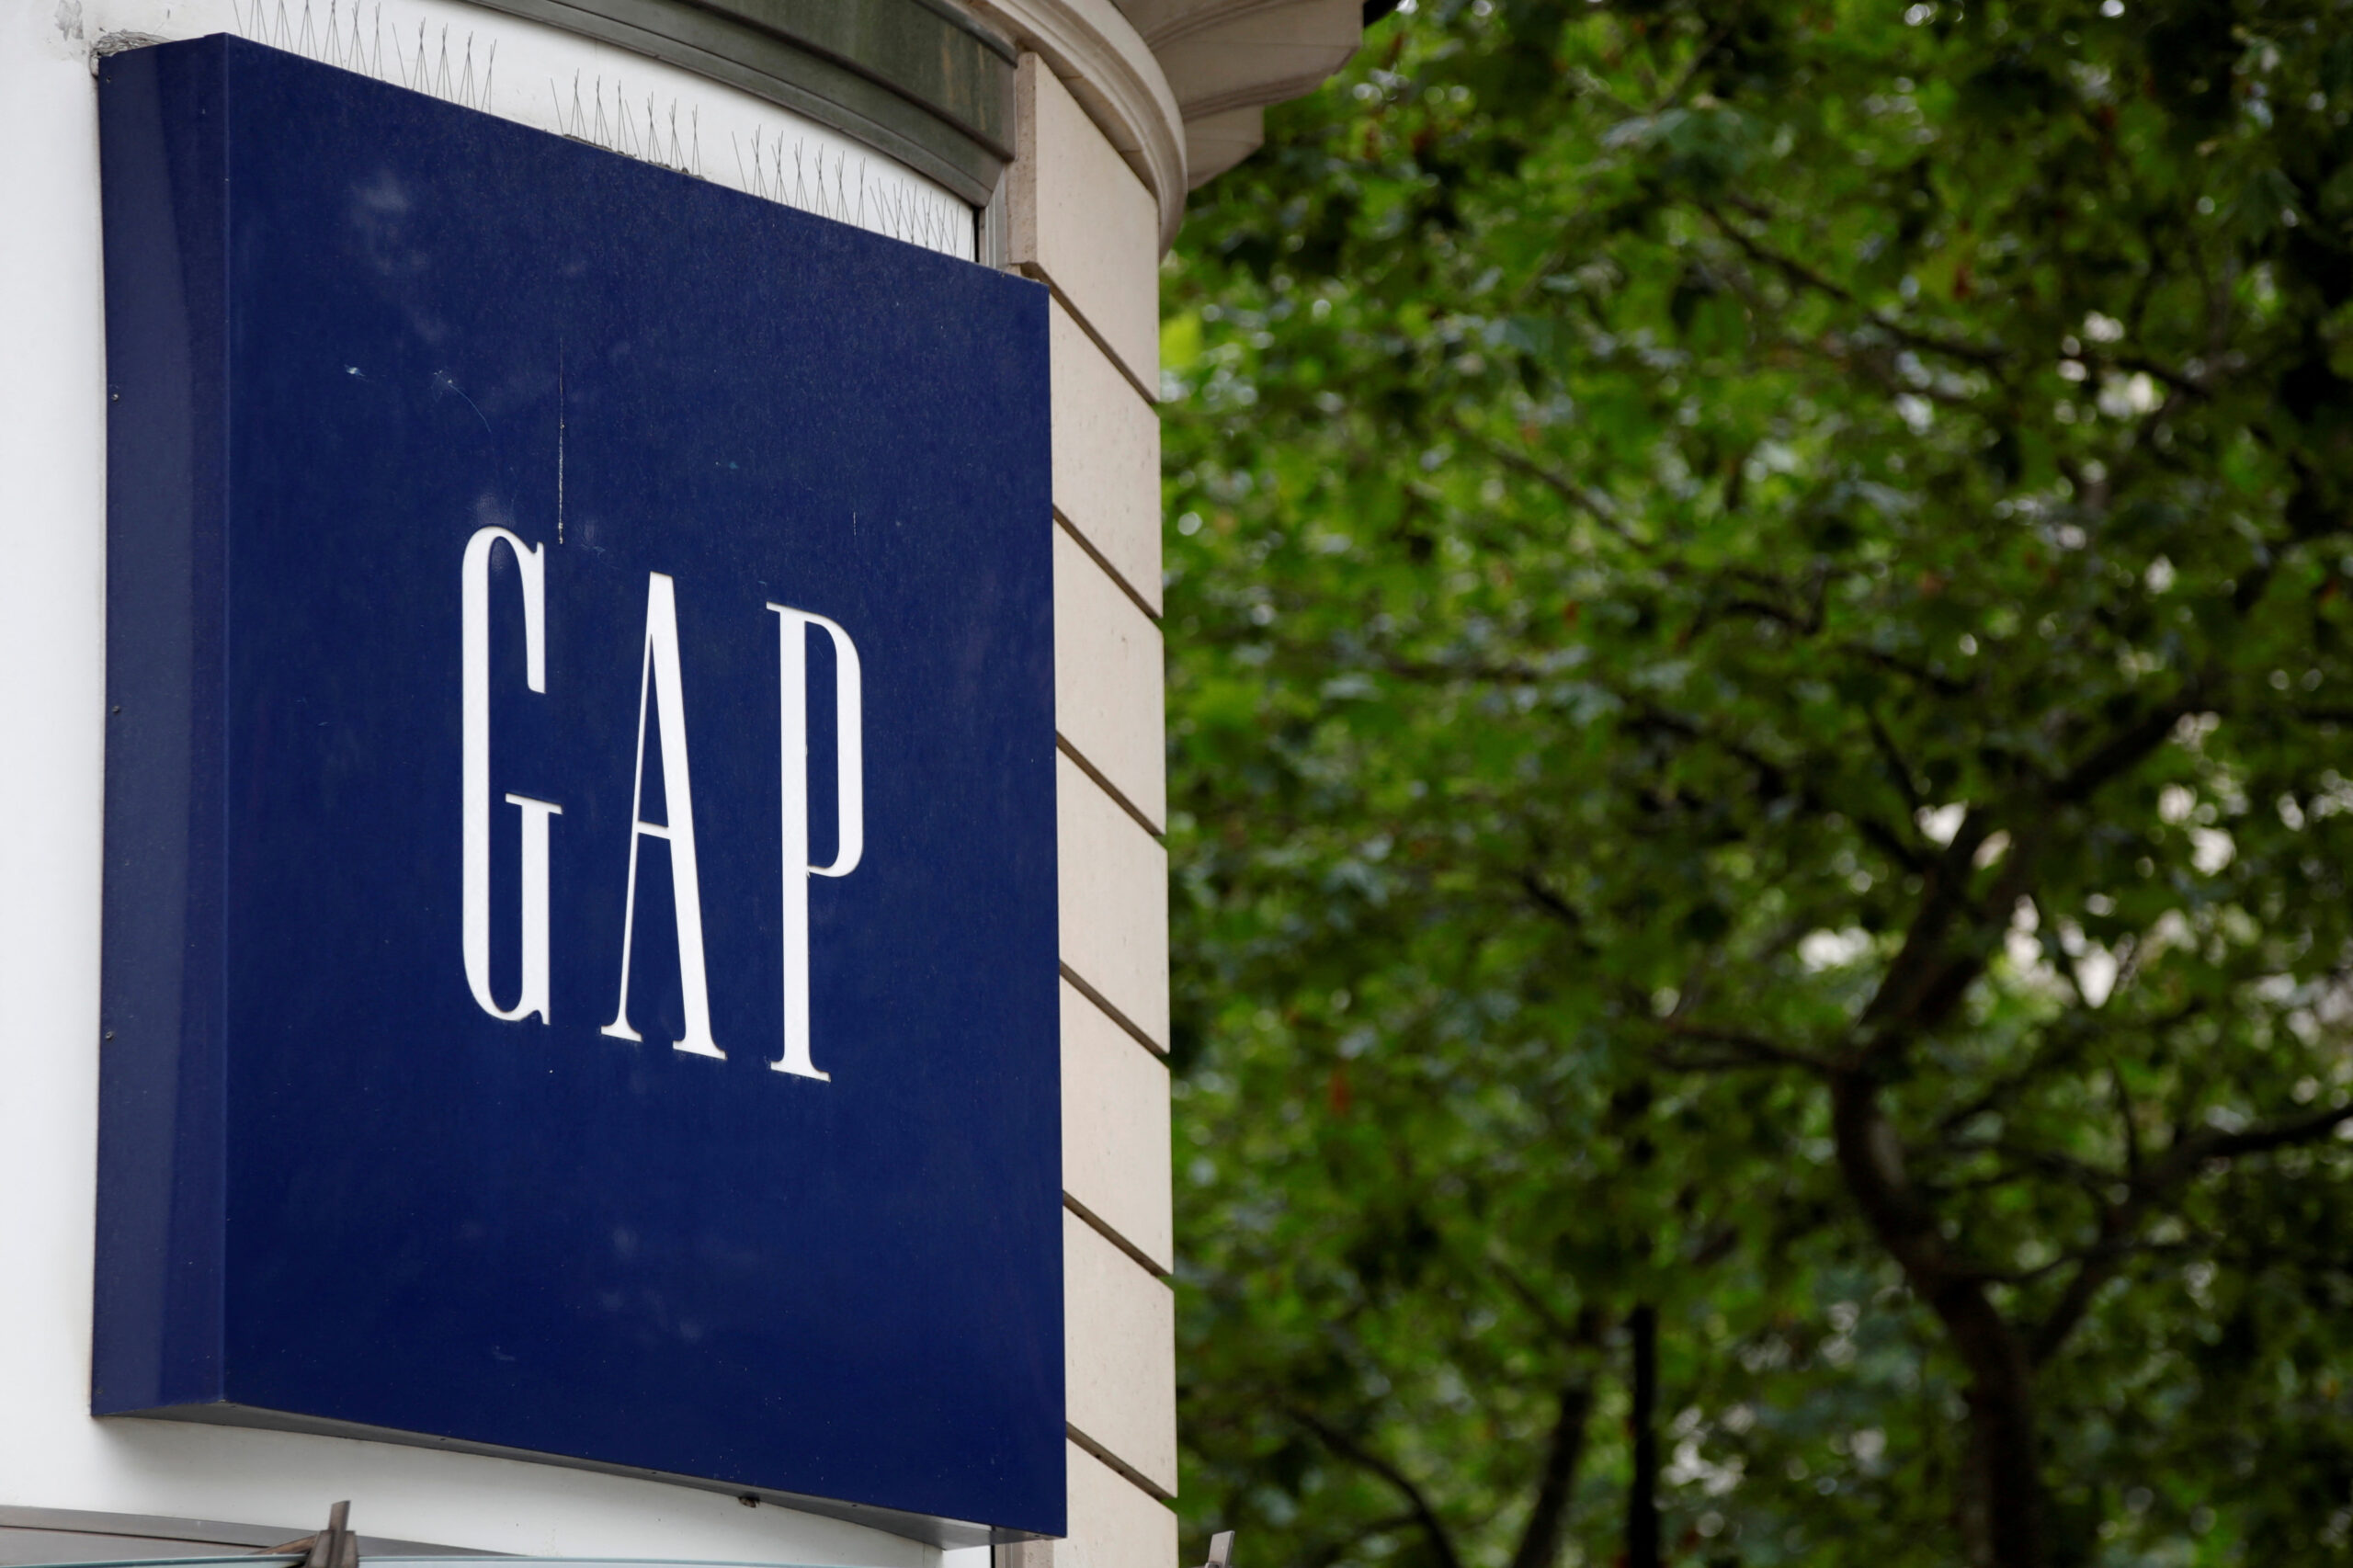 Coach sues Gap for selling 'Coach' T-shirts